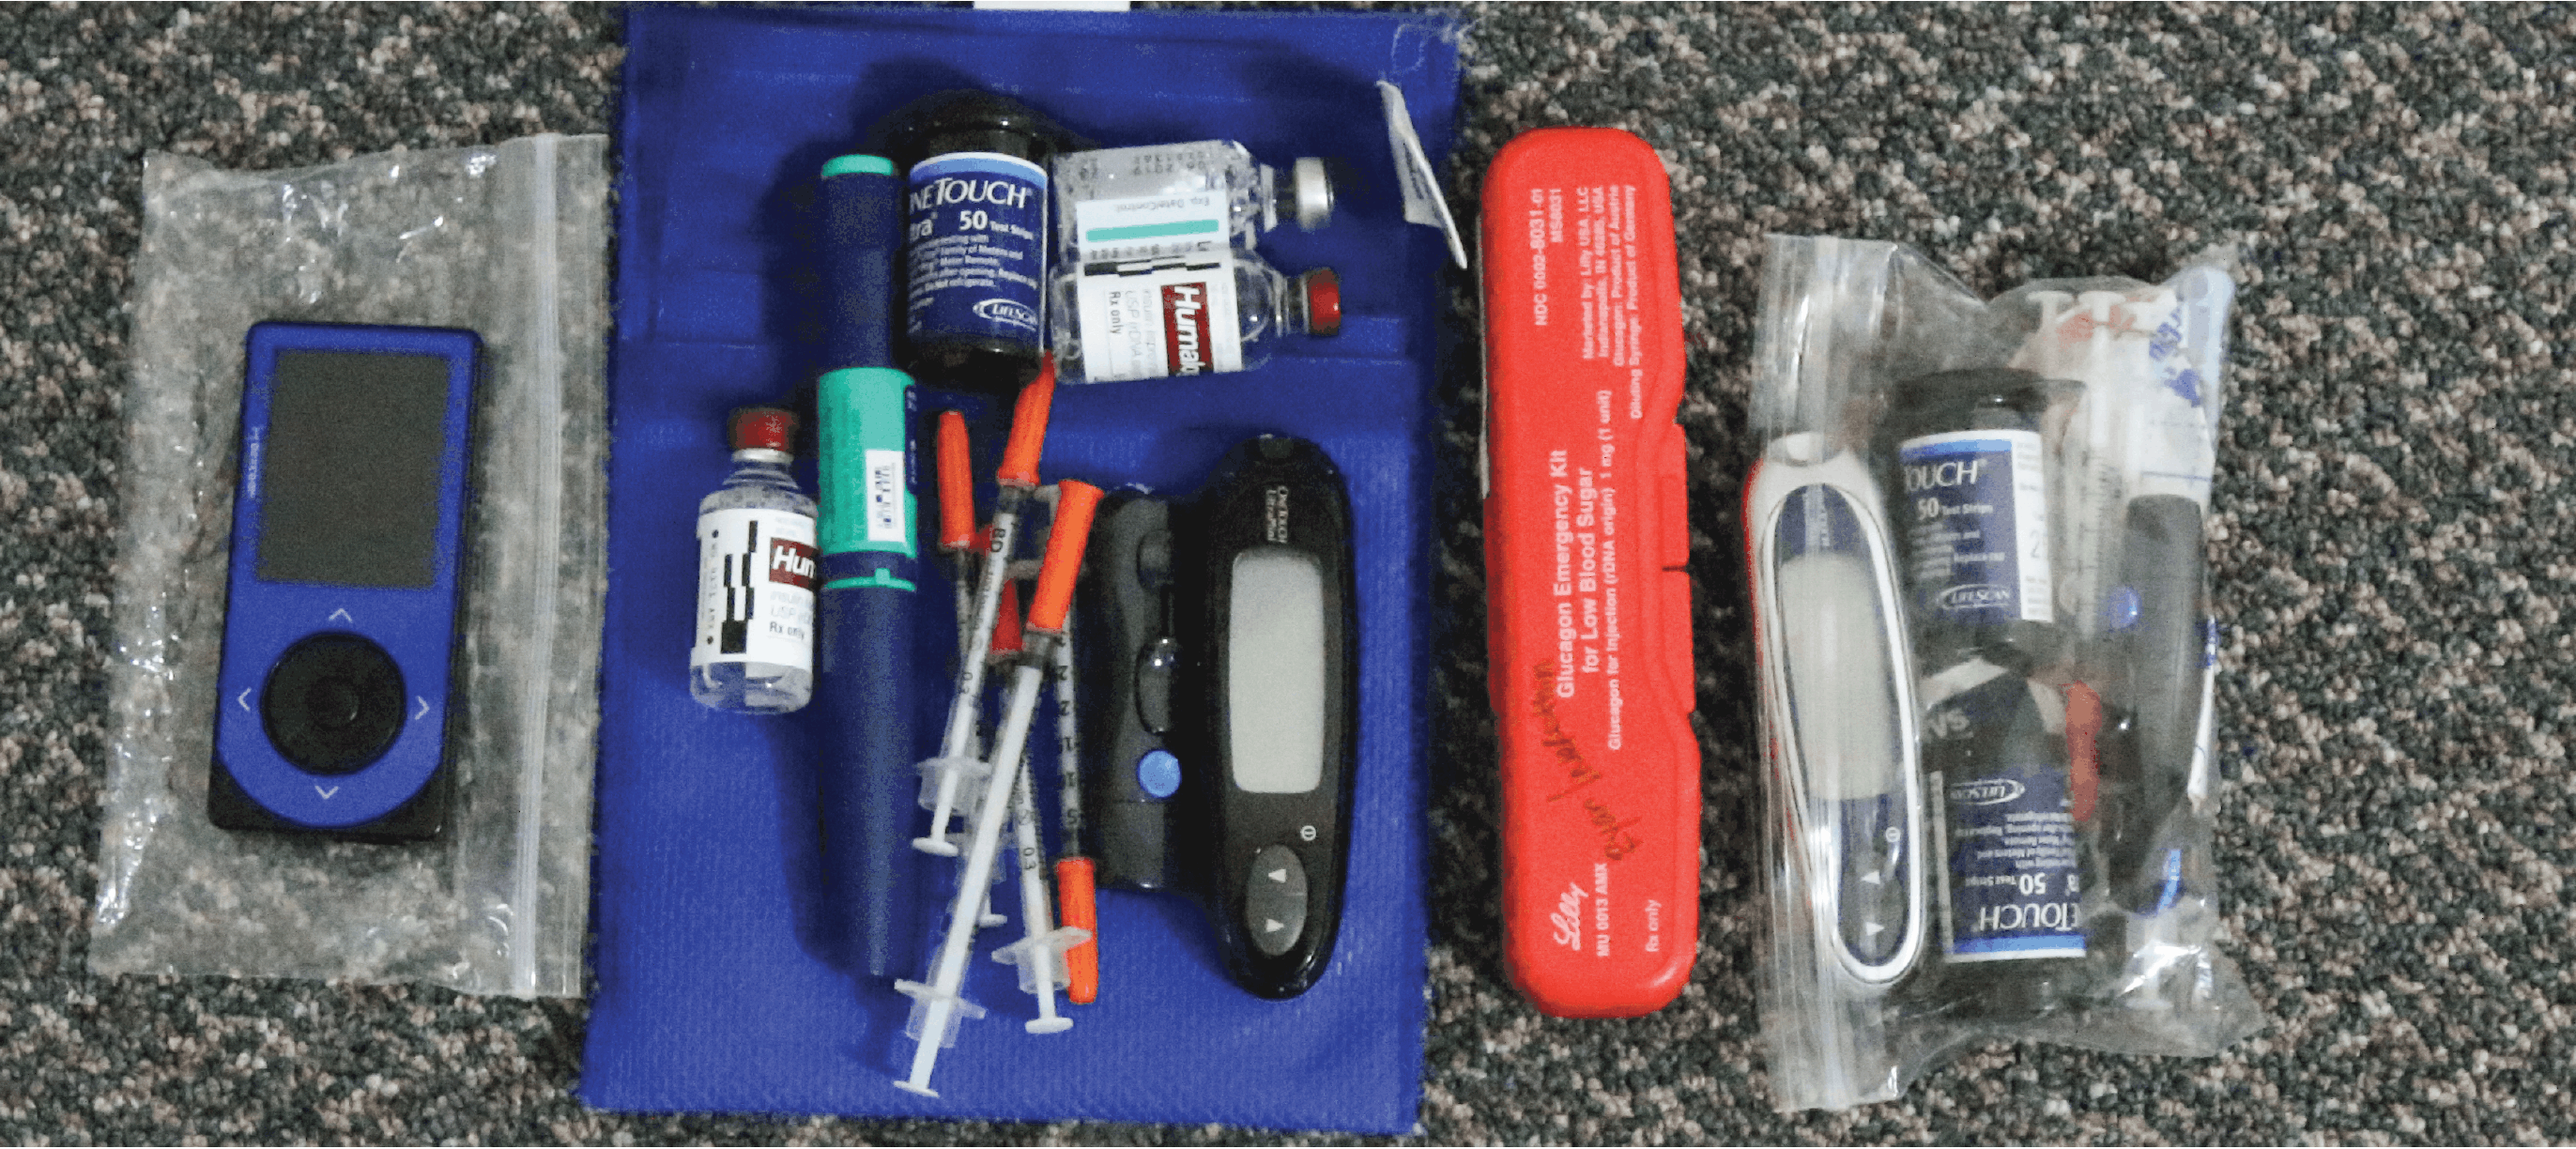 Into the Woods with Diabetes…More Than Just the Numbers